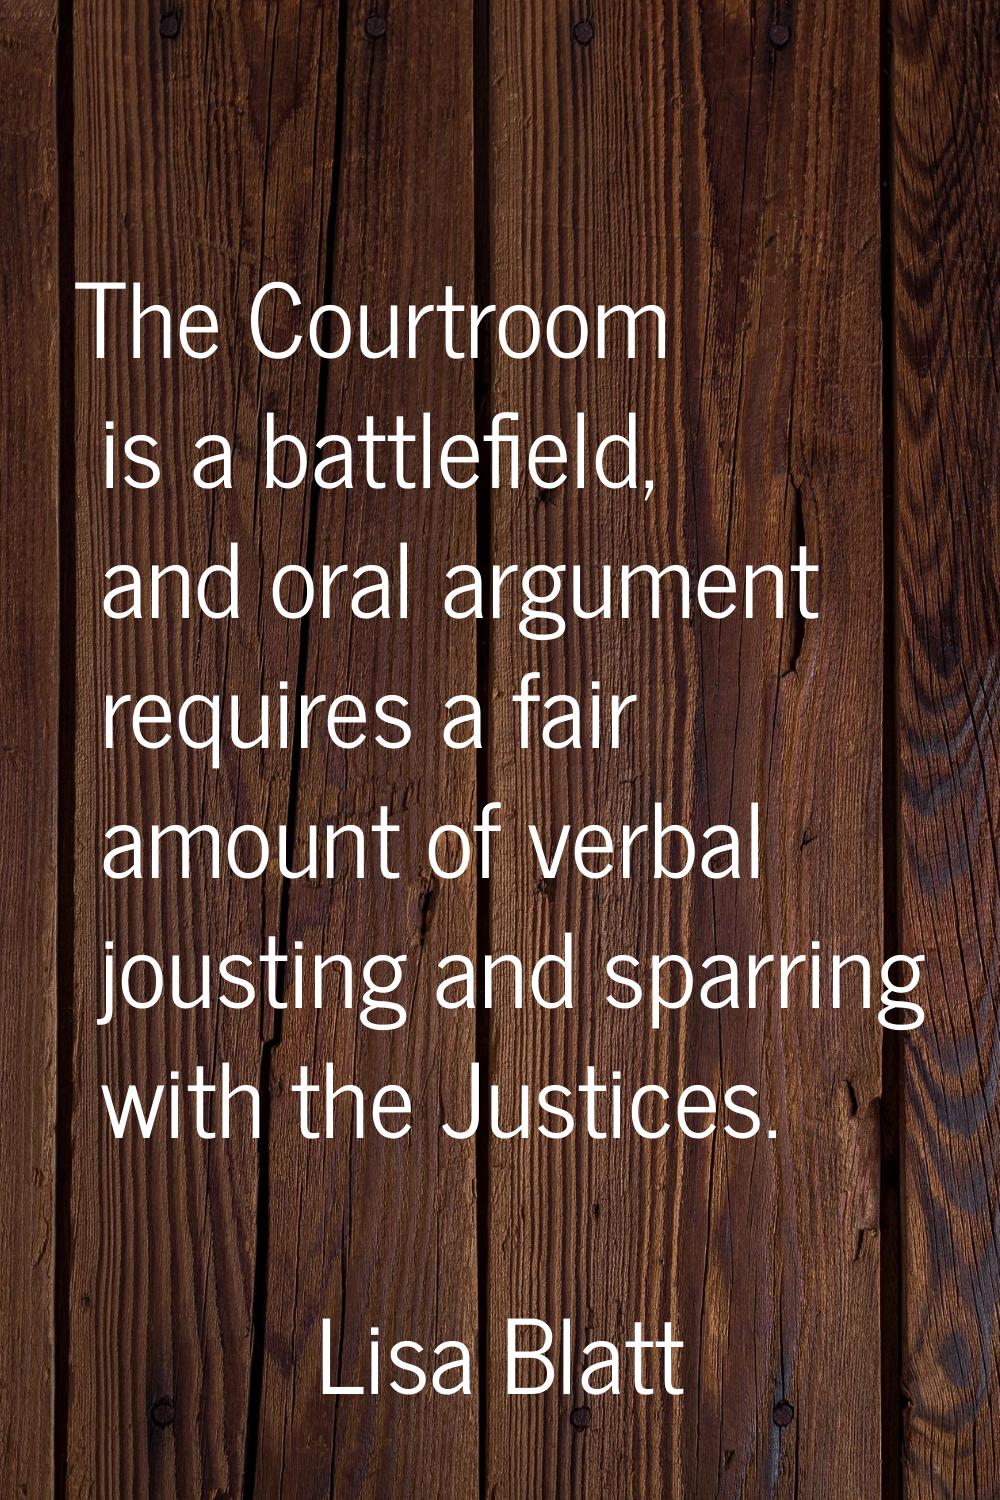 The Courtroom is a battlefield, and oral argument requires a fair amount of verbal jousting and spa